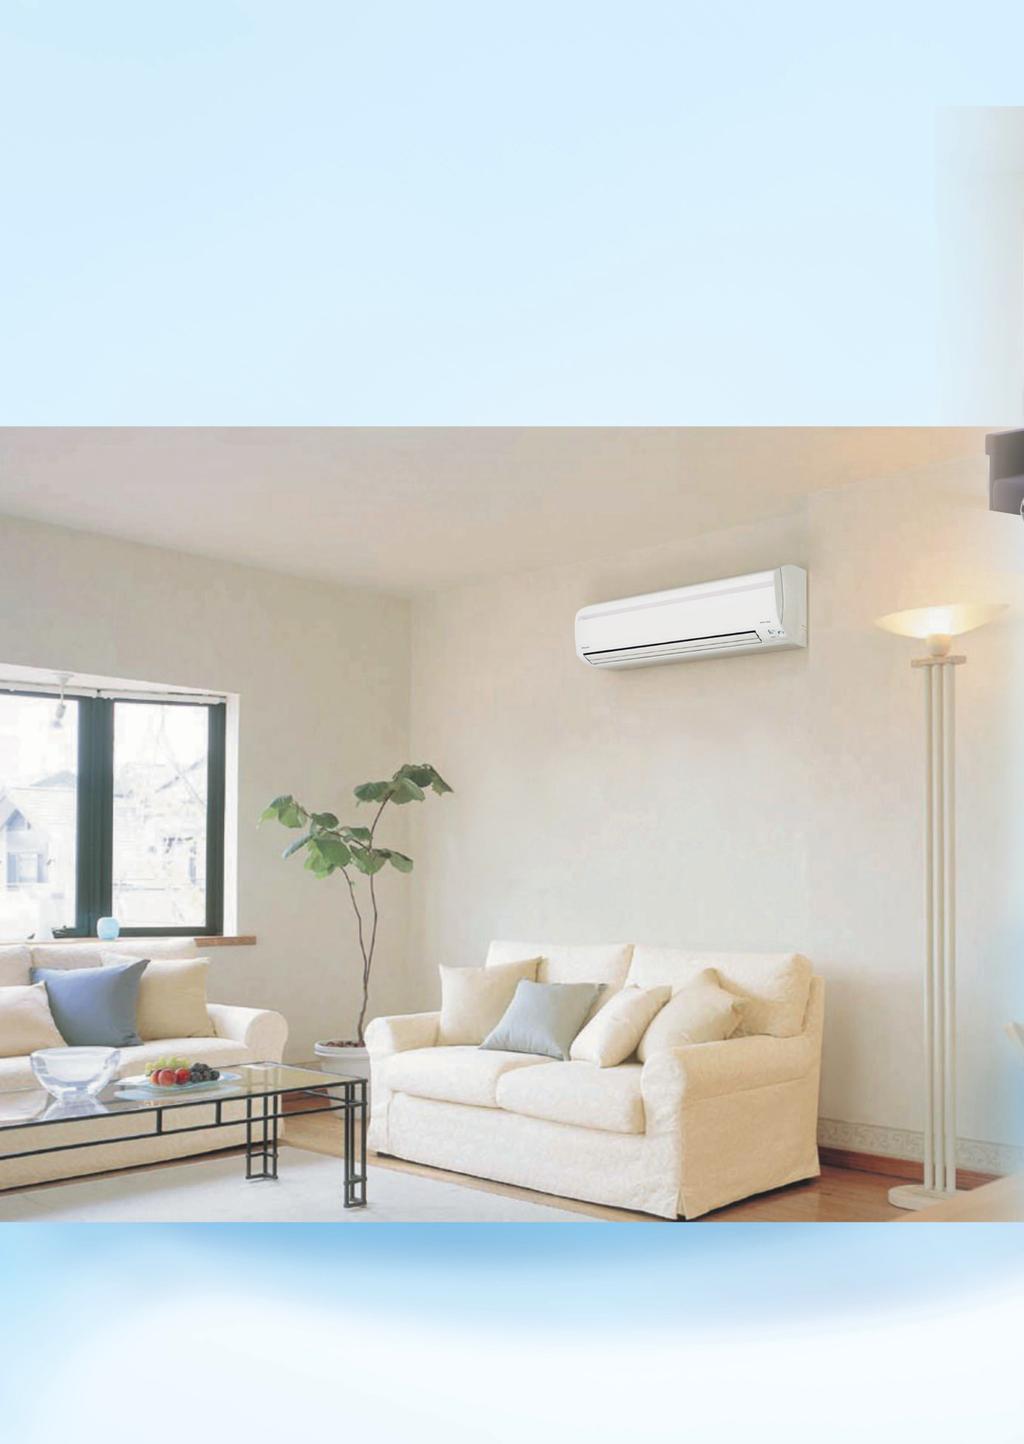 A wider lineup of DC Inverter and Non-Inverter air conditioners with 19 models is currently available. You can choose whichever that fits your lifestyle.